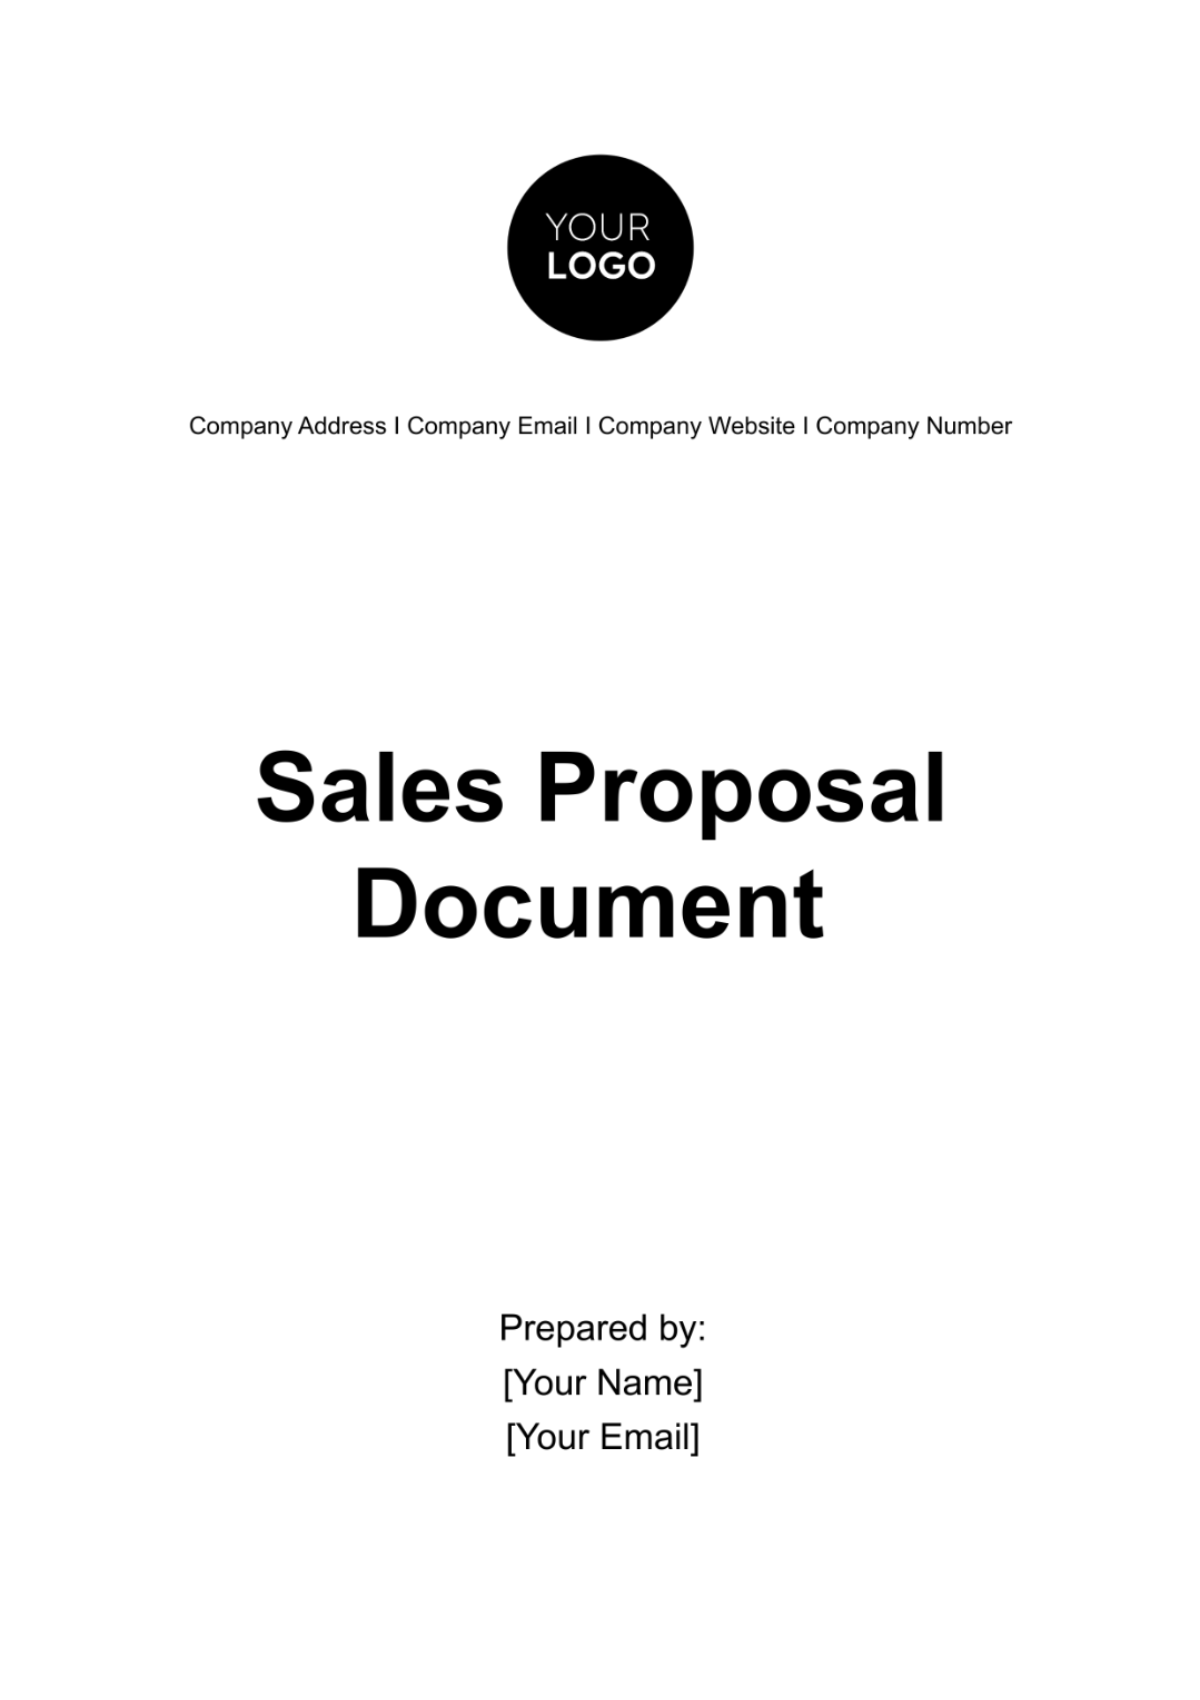 Sales Proposal Document Template